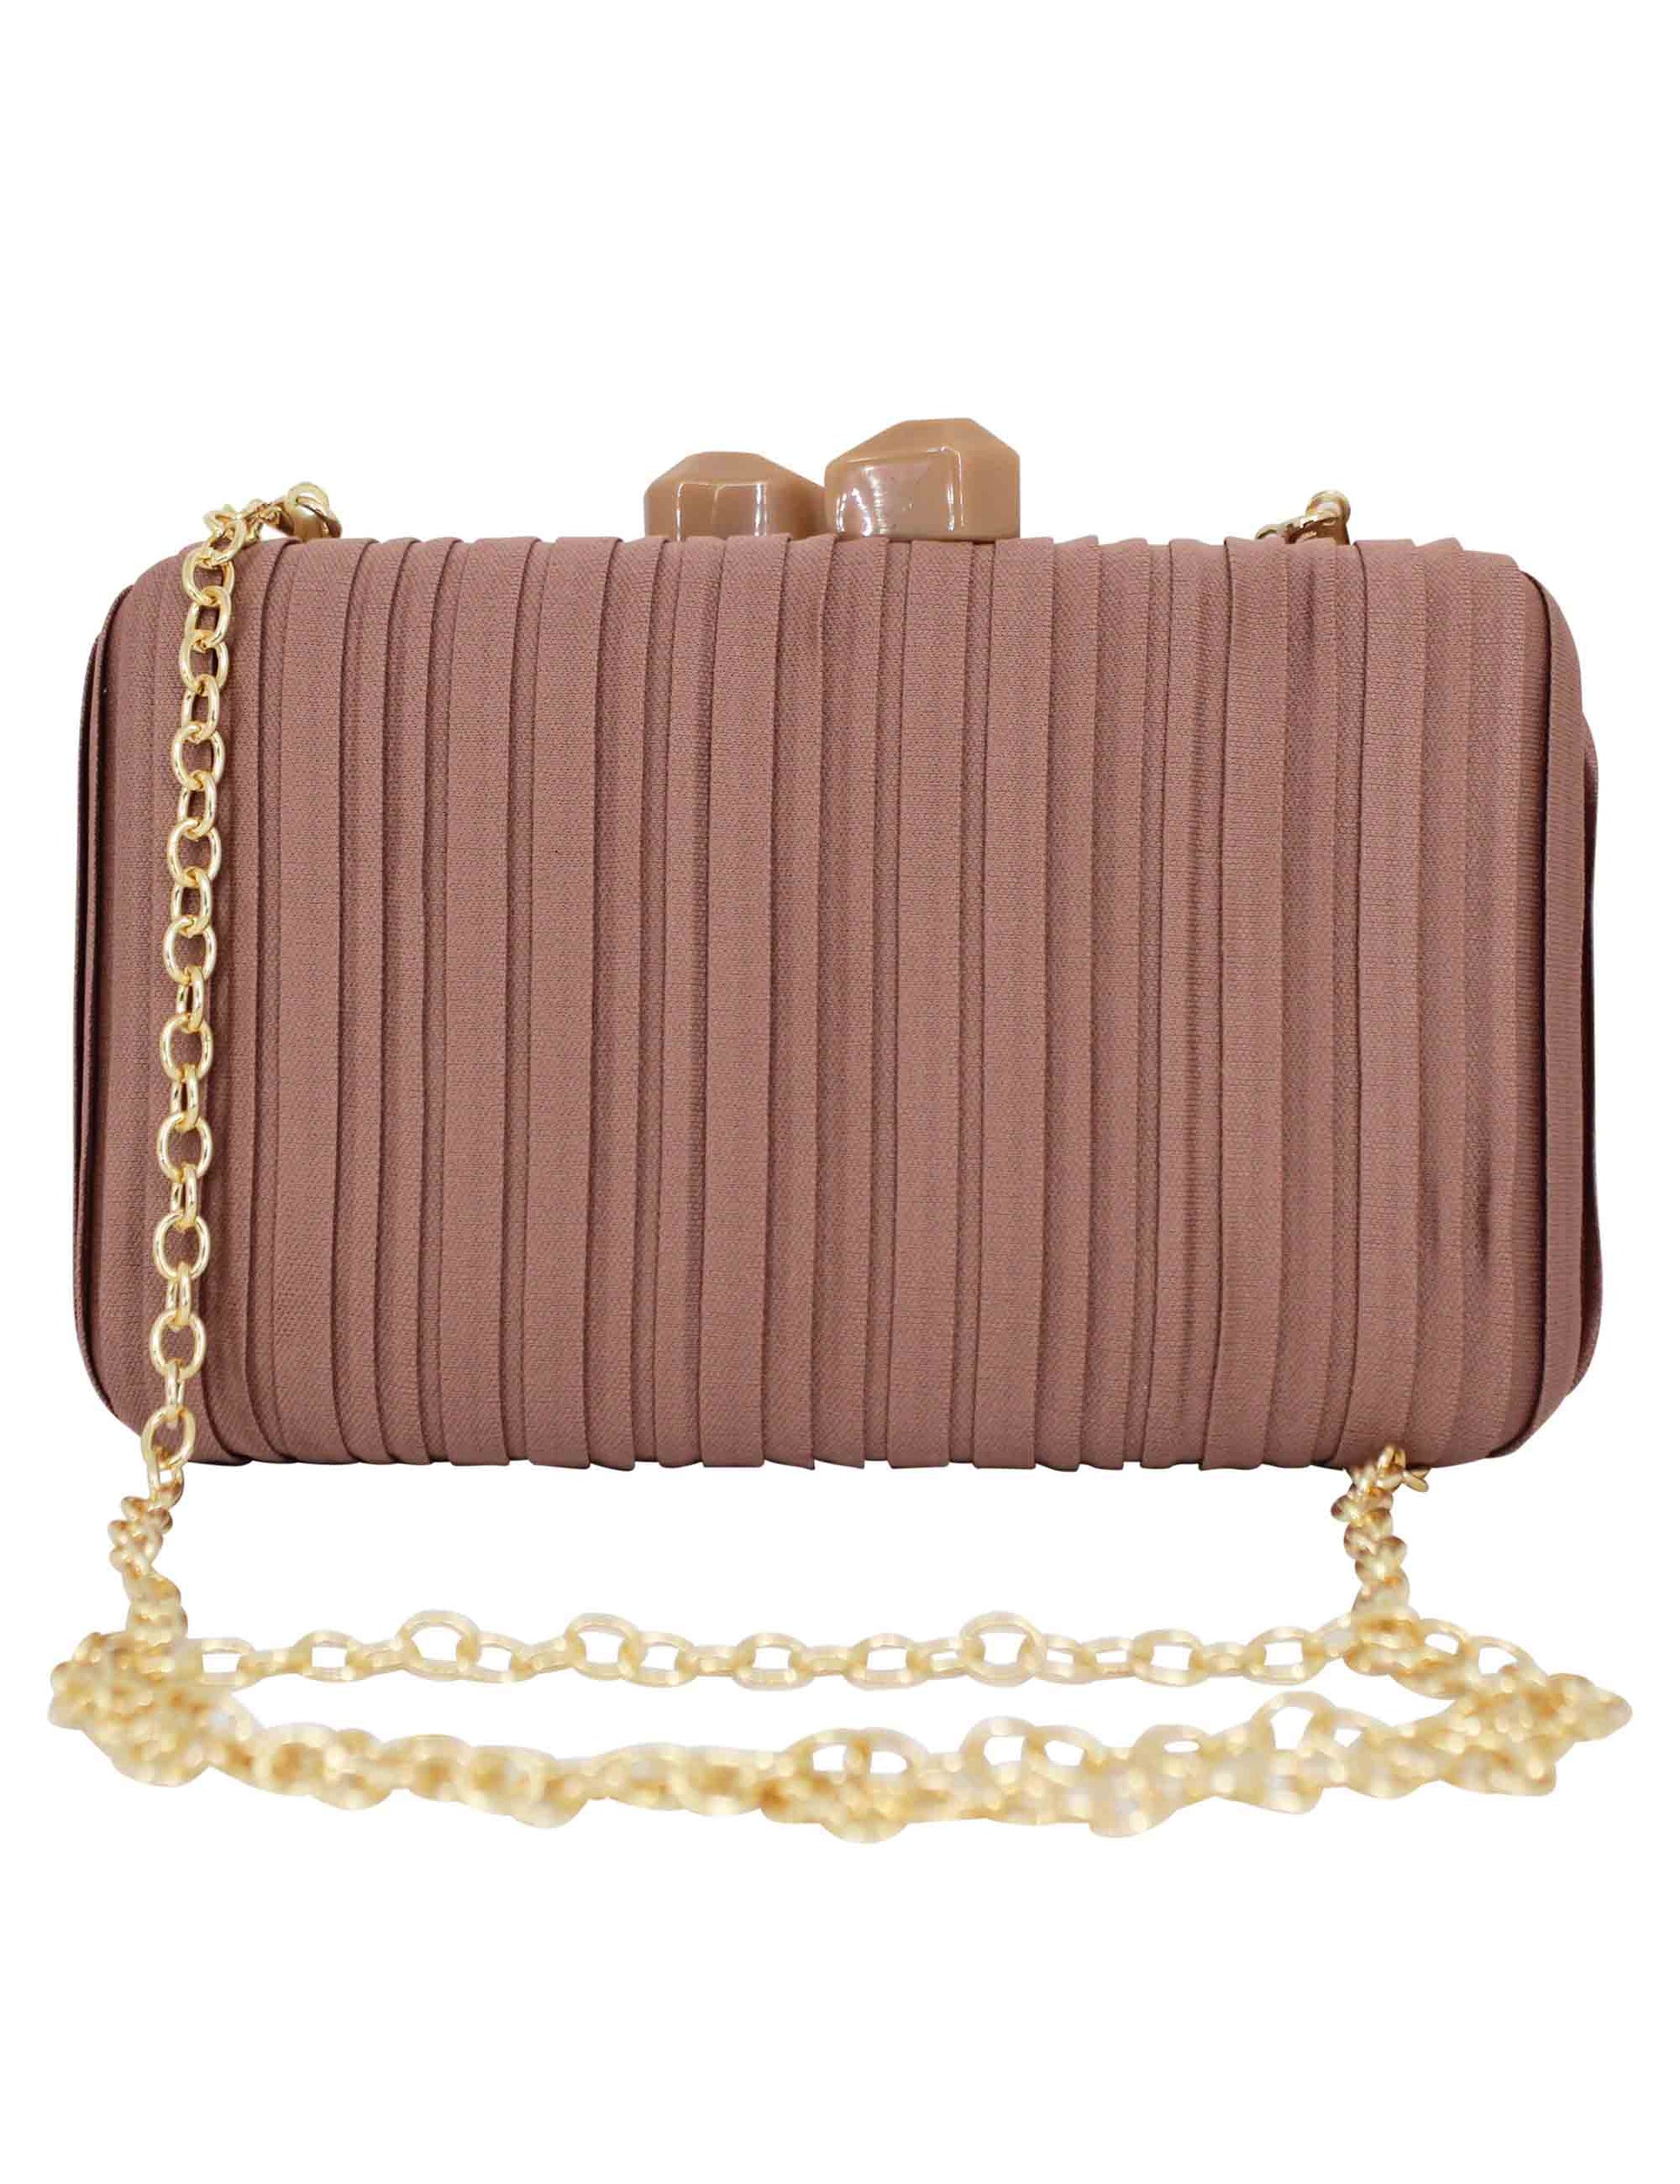 Women's clutch bags in brick fabric with gold shoulder strap